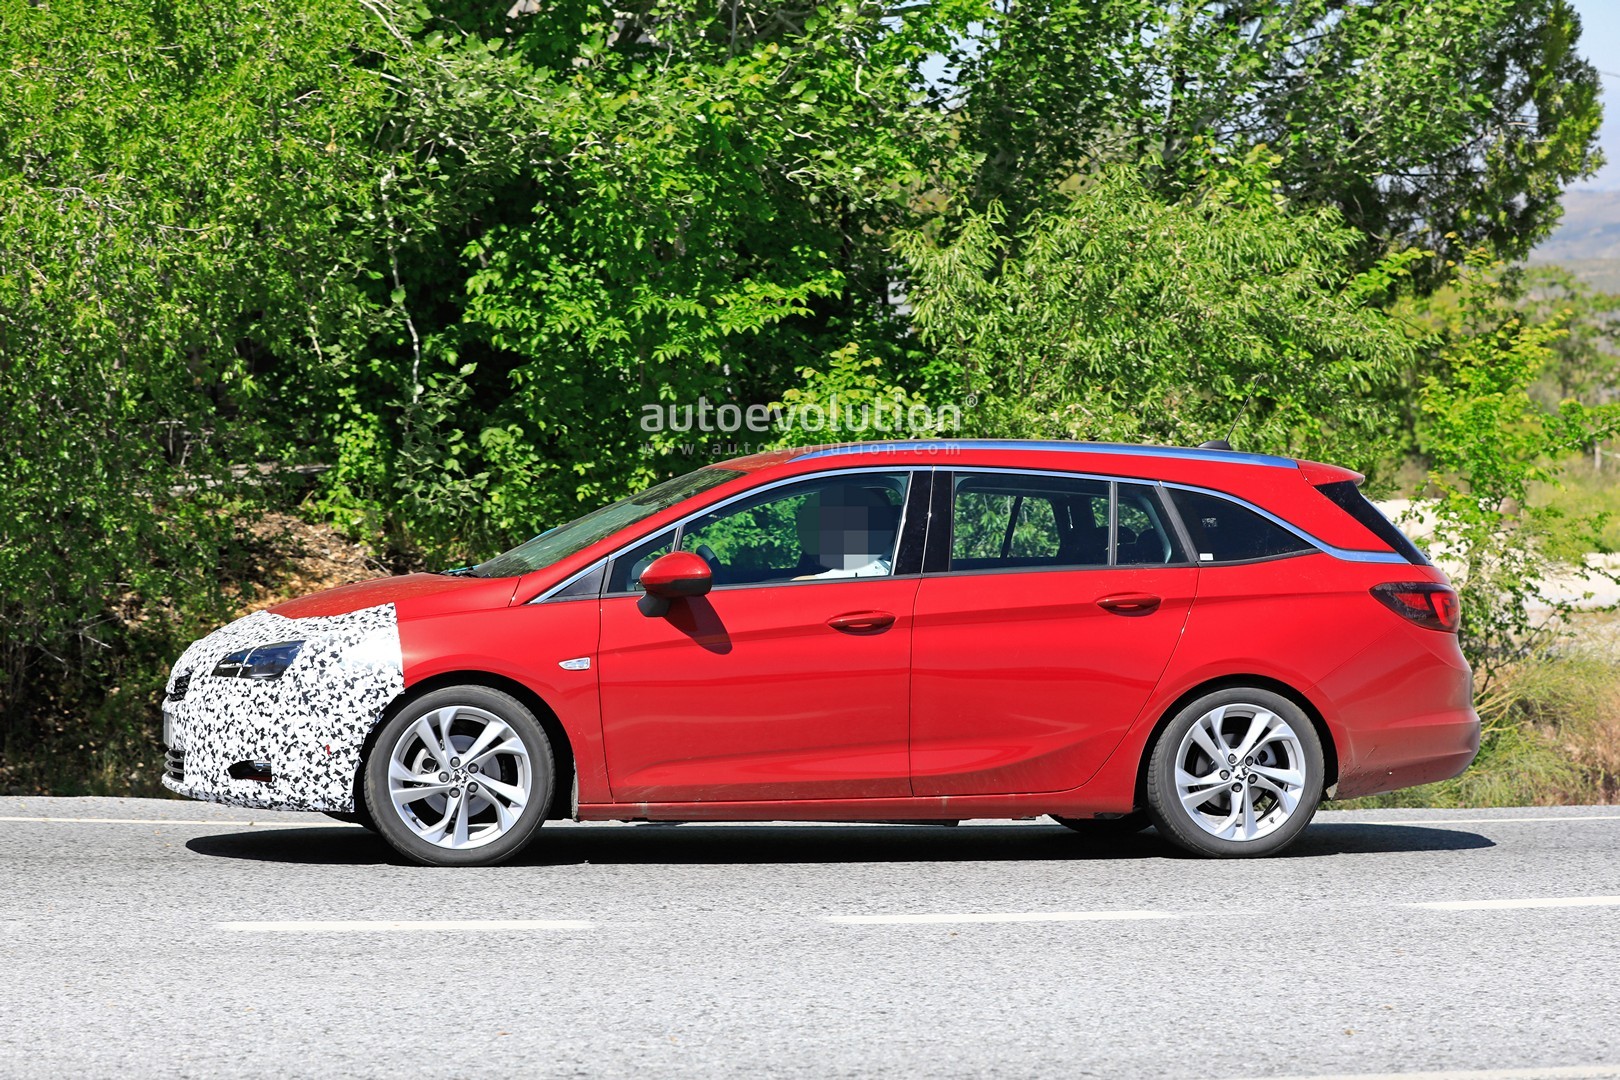 2020 Opel Astra Wagon Spied With Mild Facelift, Getting Ready for Peugeot  Tech - autoevolution